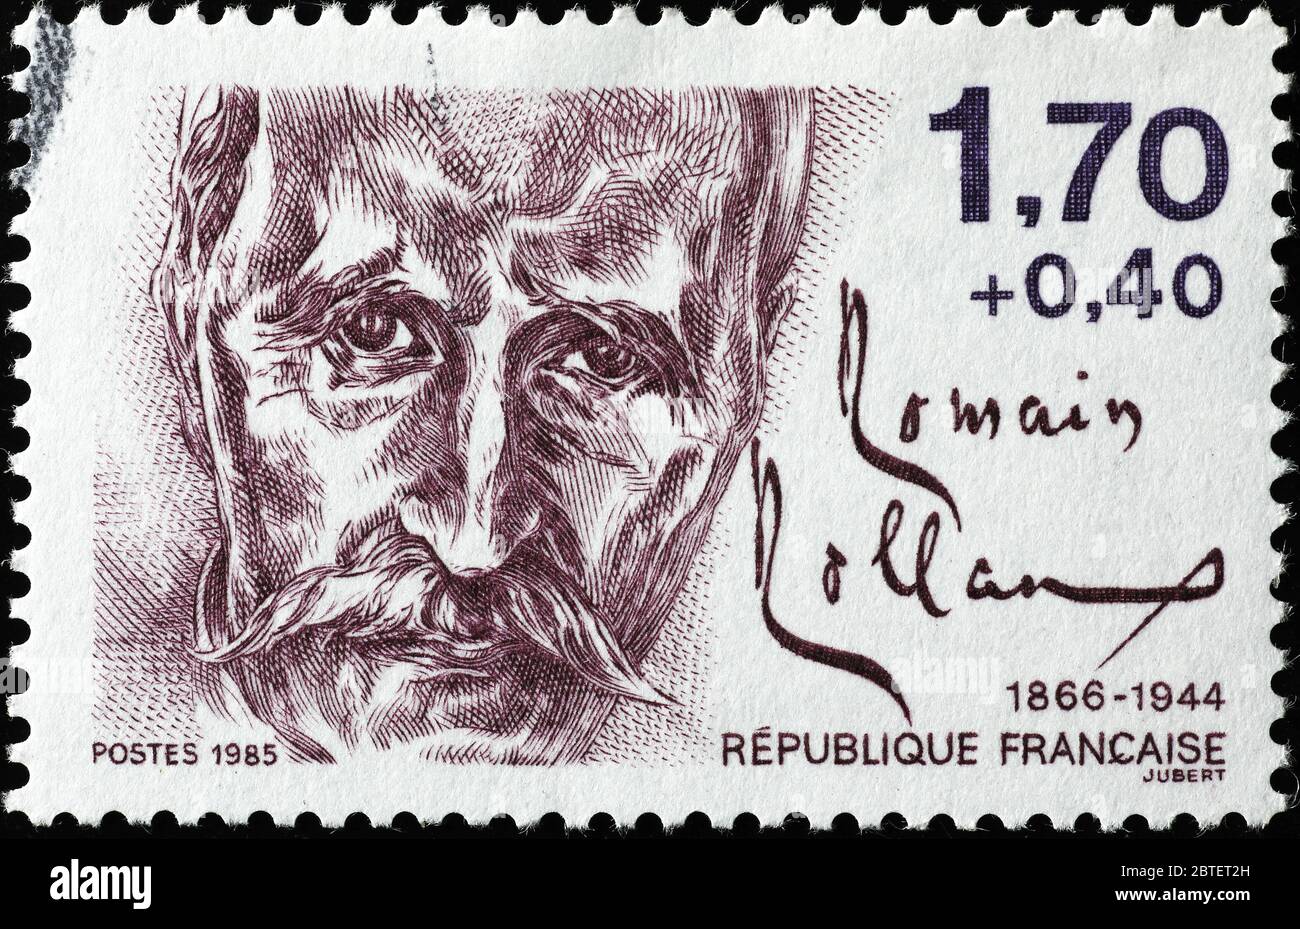 Portrait of Romain Rolland on french postage stamp Stock Photo